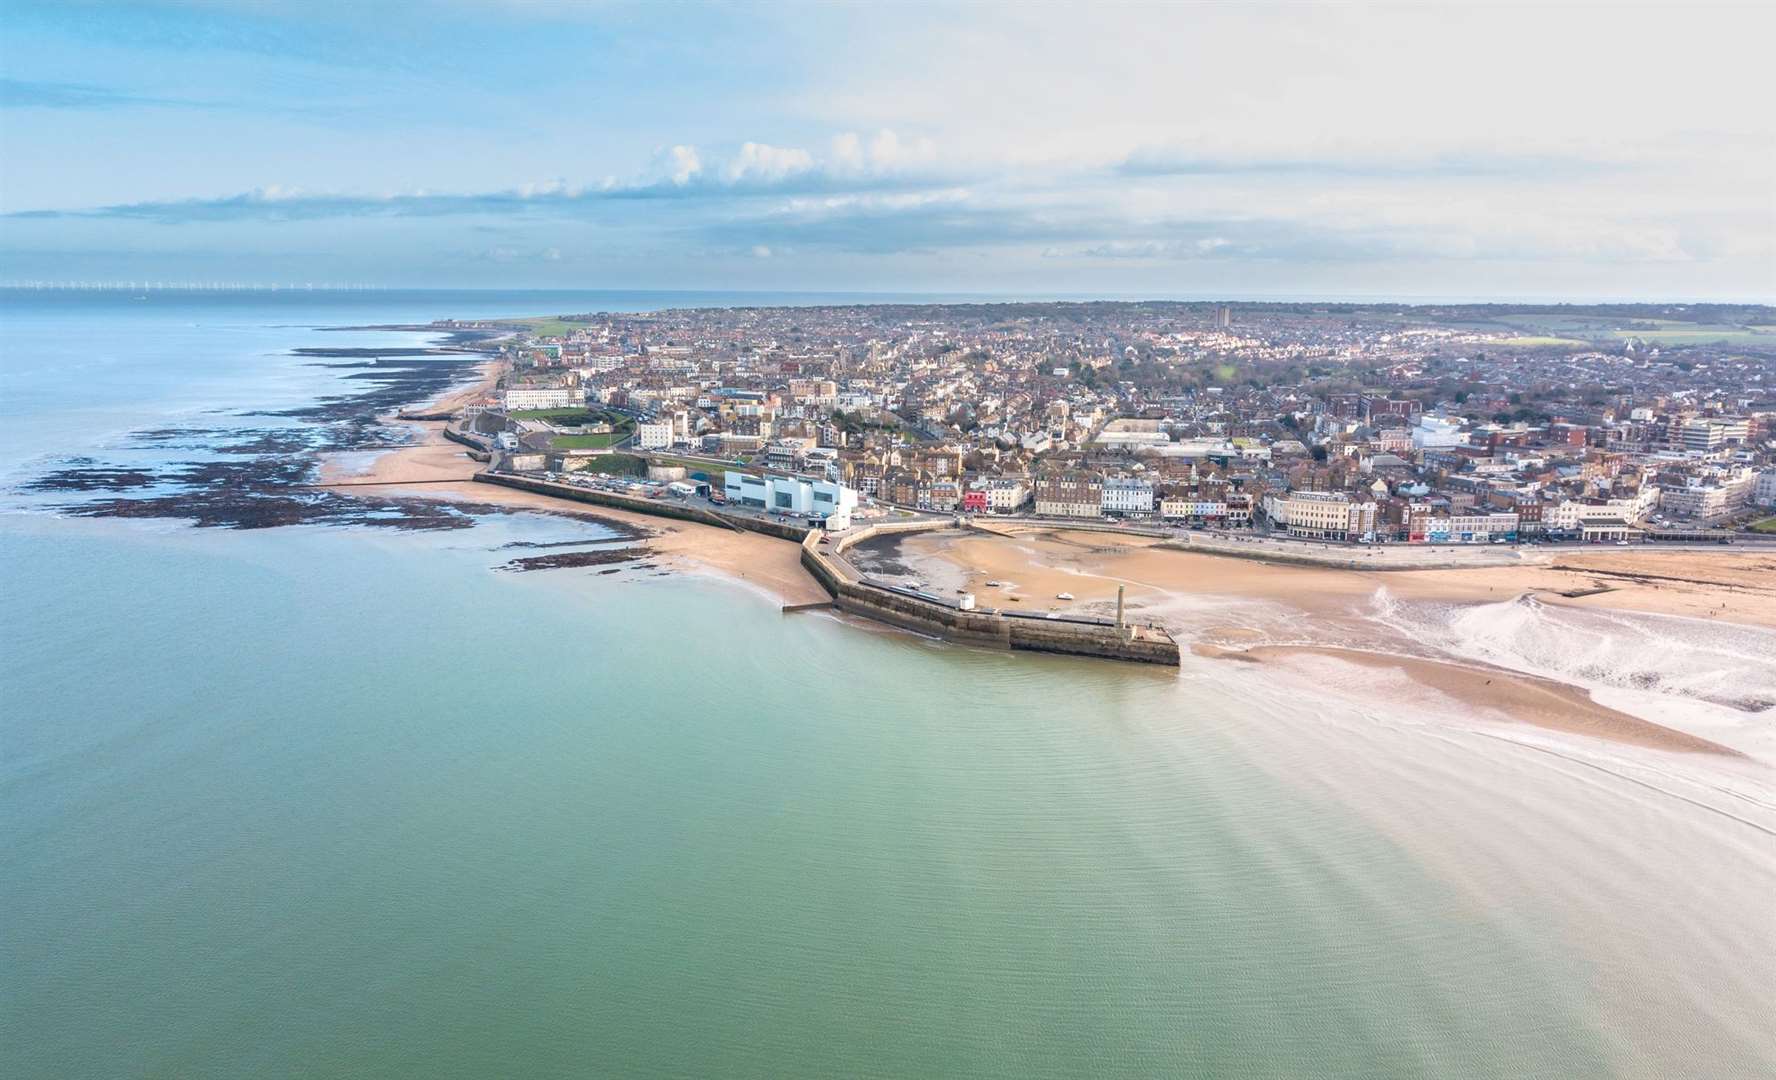 Thanet District Council is considering taxing tourists and turning beach huts into holiday lets